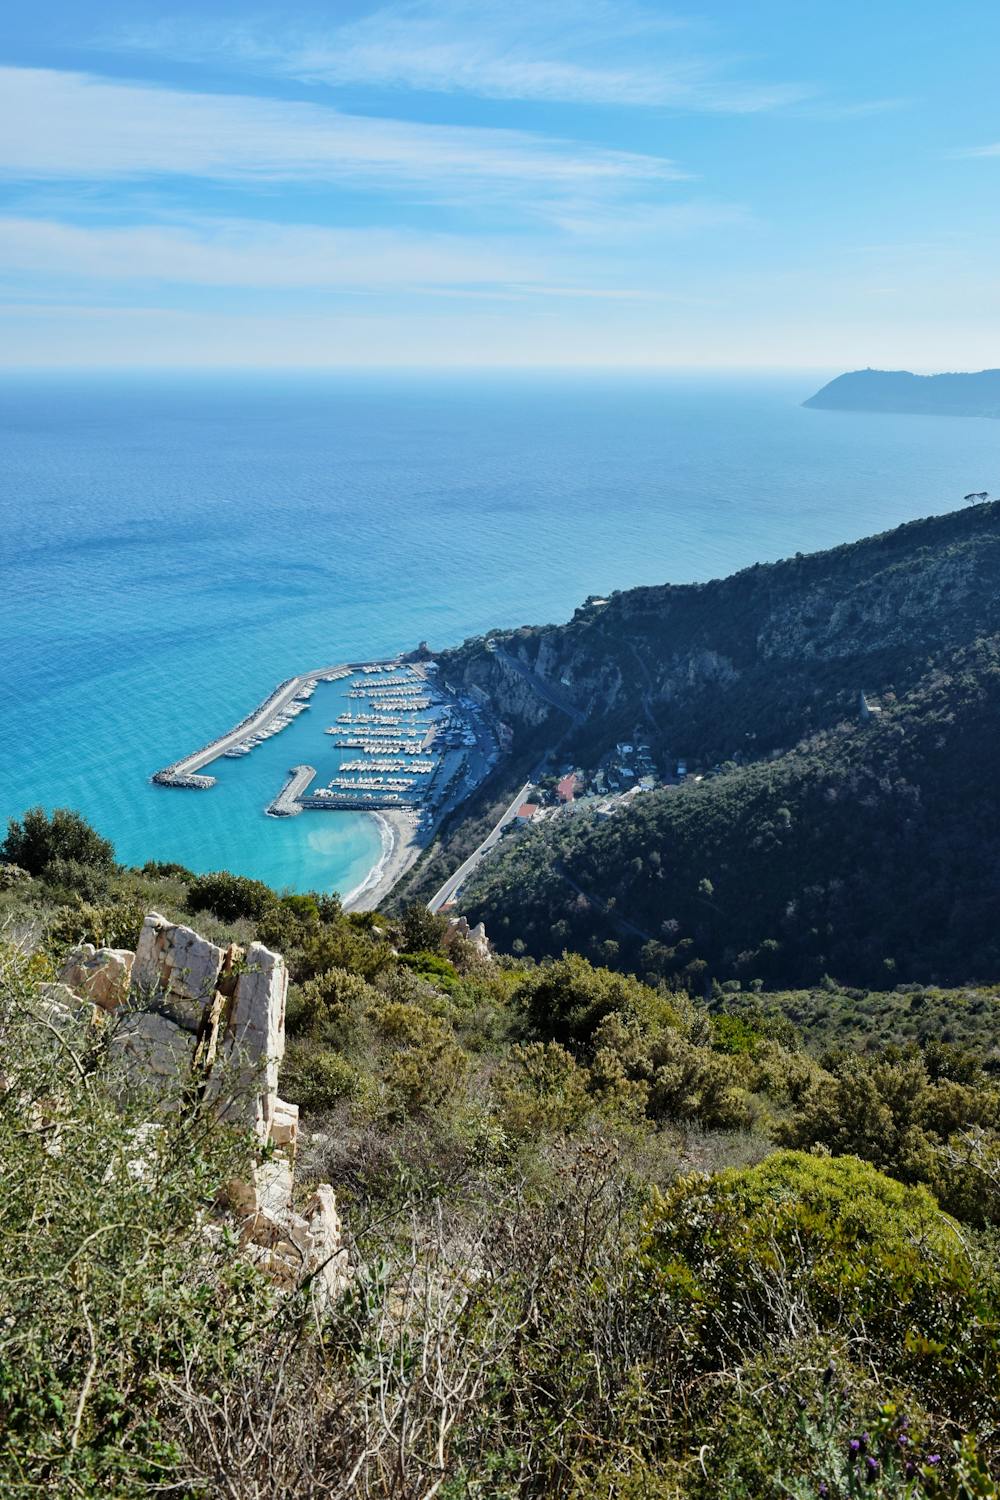 View of the port of Alassio and the bay below